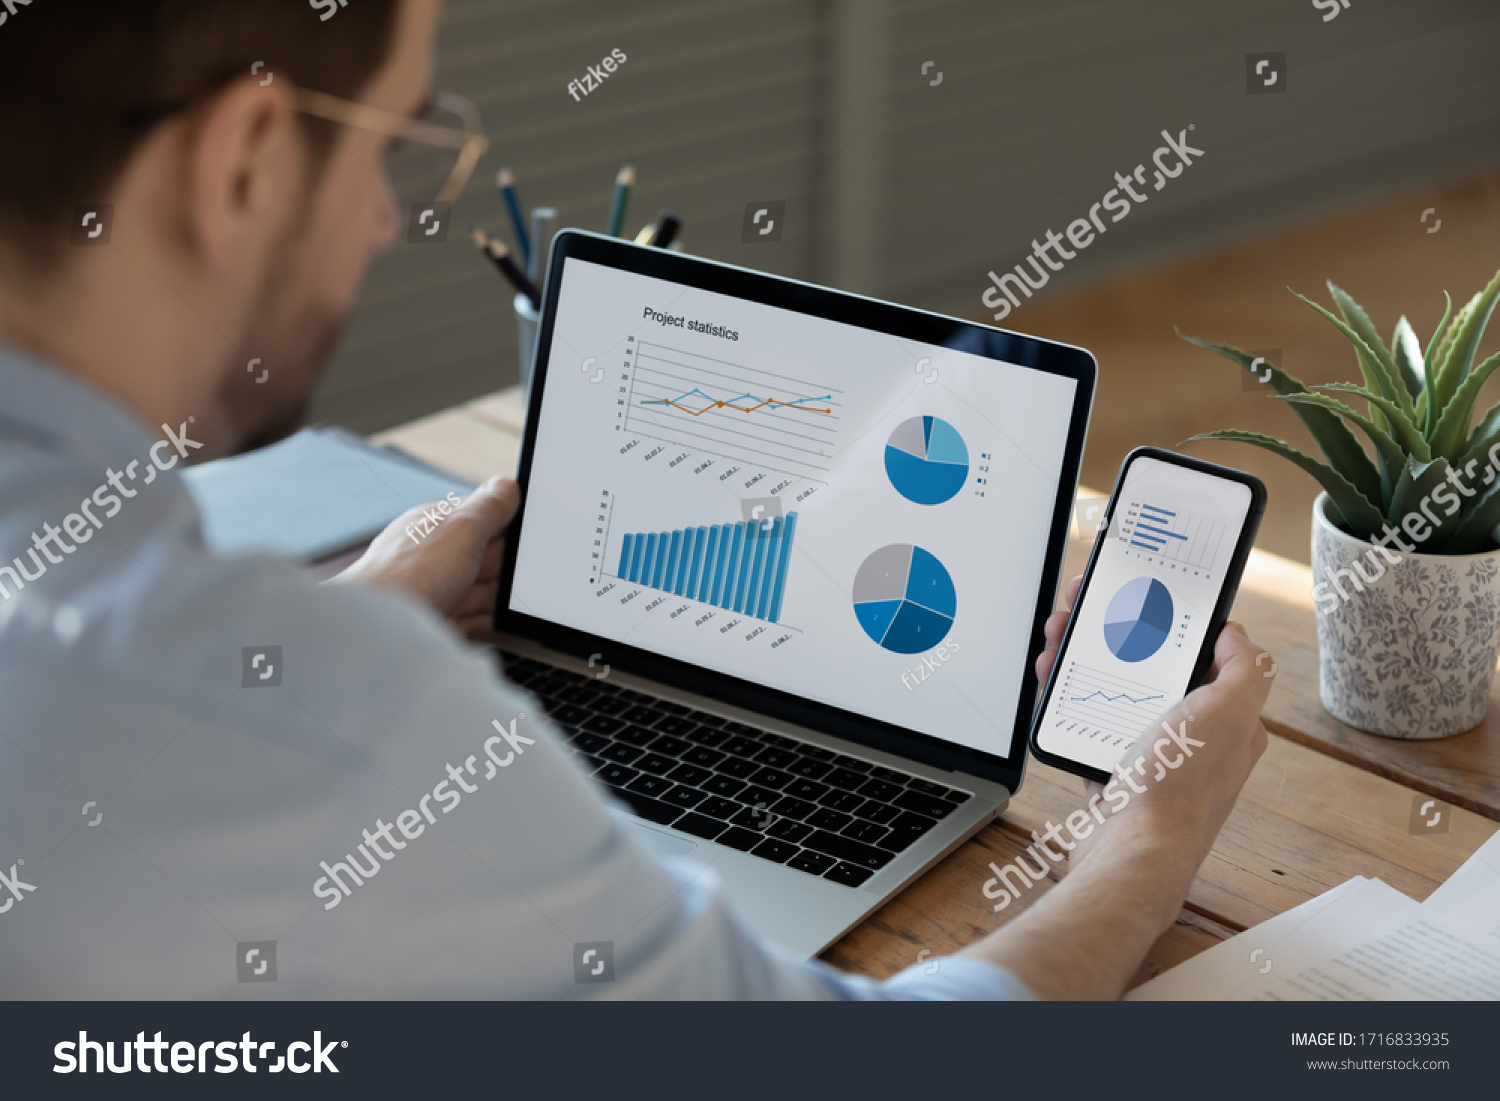 Close up businessman working with statistics, looking at laptop and phone screens with graphs and diagrams, synchronizing electronic devices, checking financial report presentation, sitting at desk #1716833935